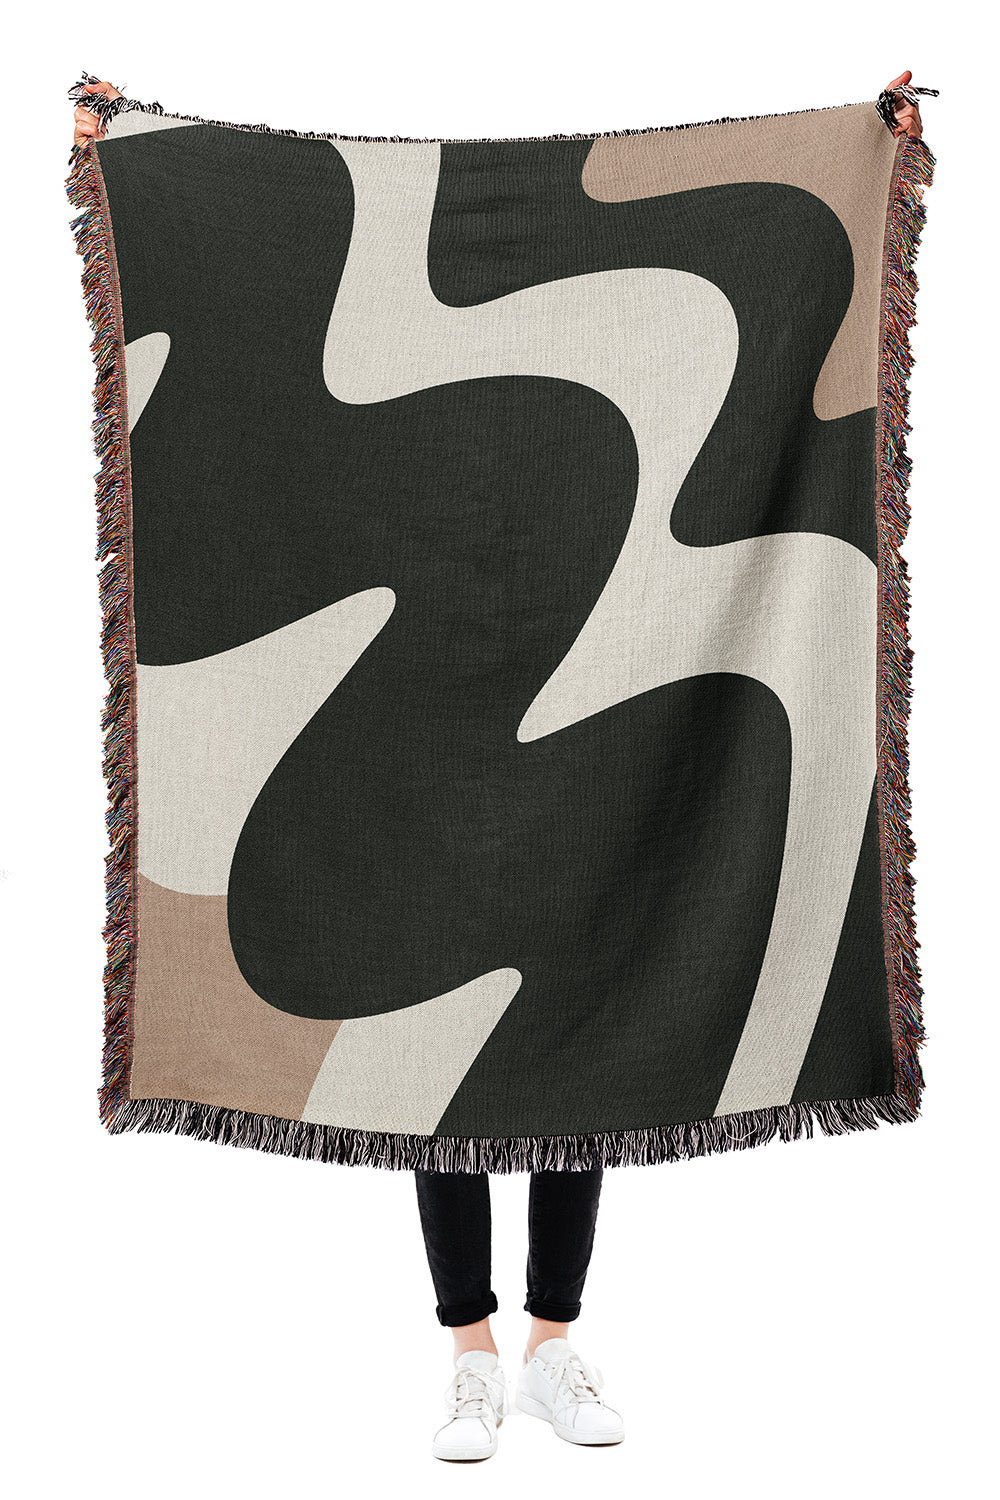 Black and White Zig Zag Cotton Woven Throw Blanket showcasing a classic black and white zigzag design.